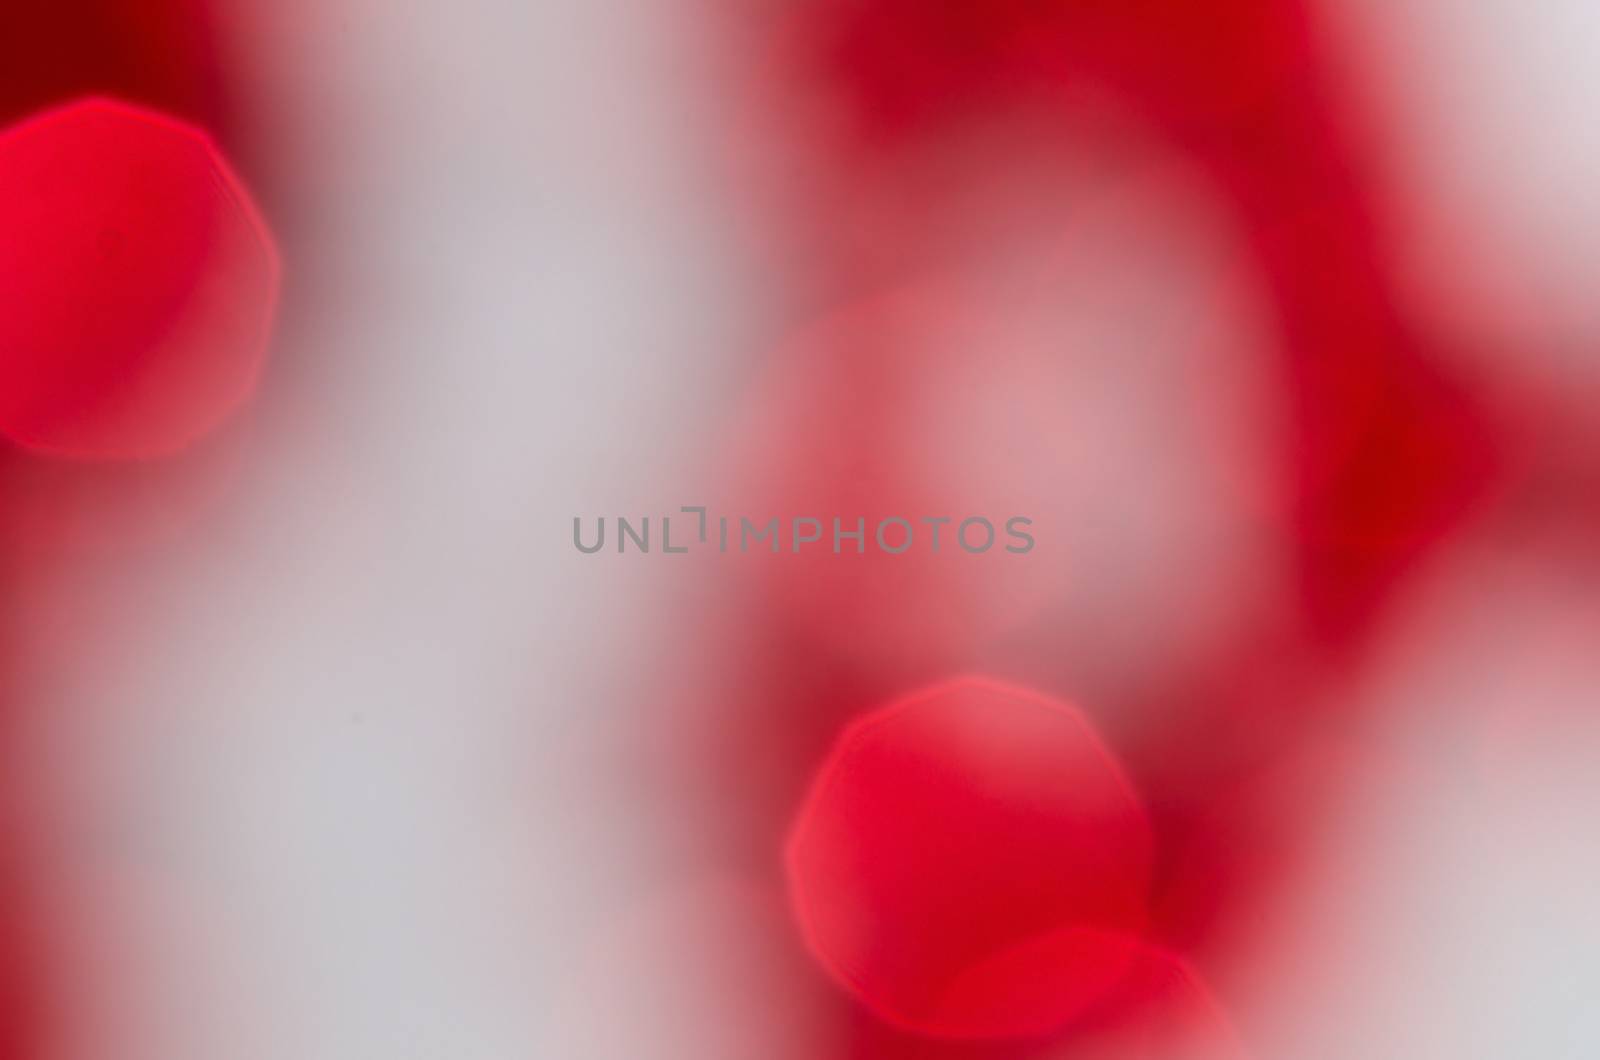 Abstract red circle christmas lights as background.